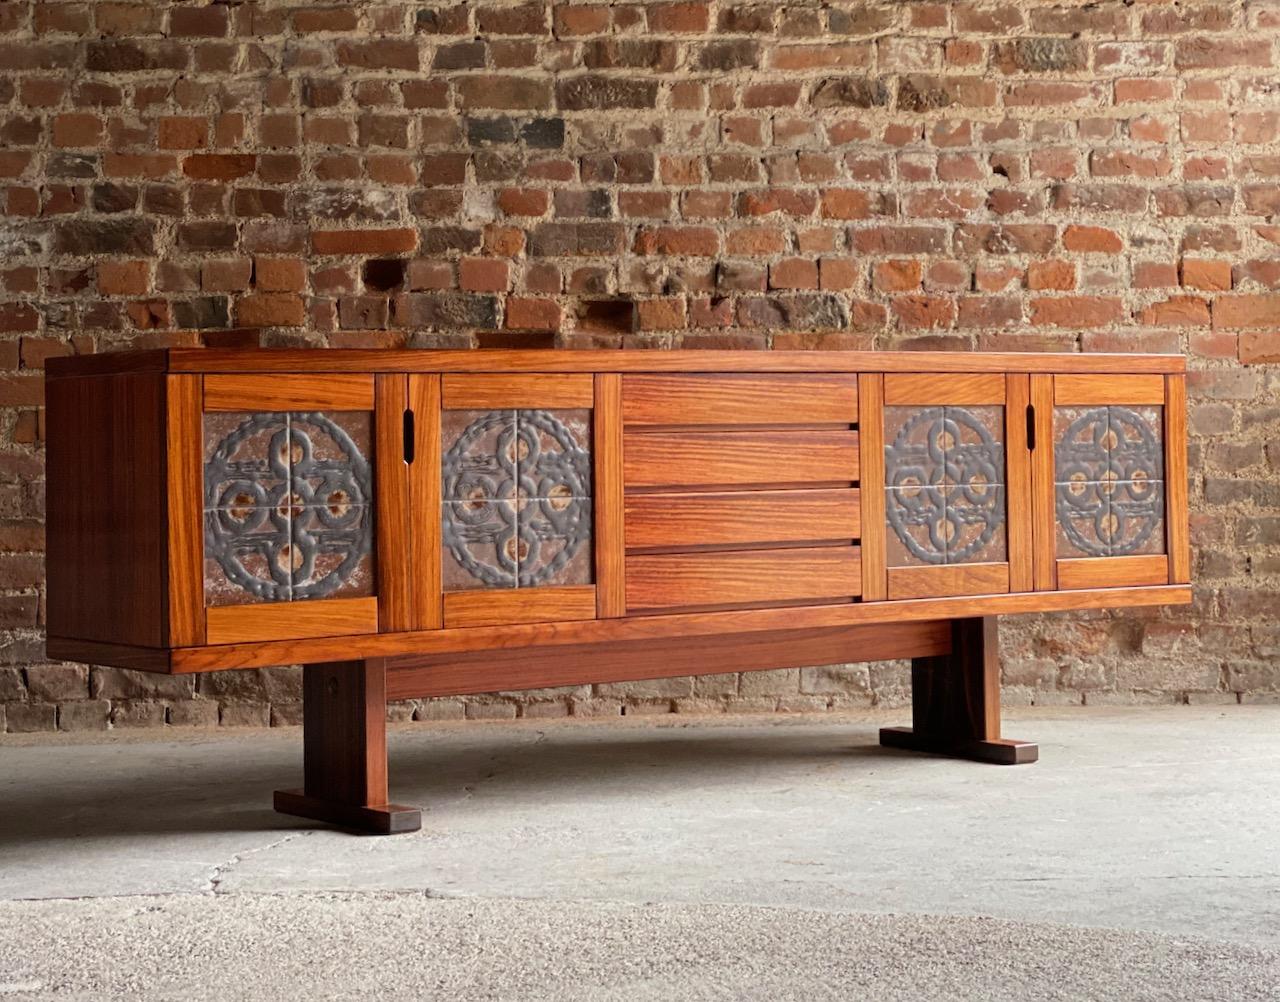 Gangso Mobler rosewood sideboard Poul H. Poulsen, Denmark, circa 1978

Rare and exceptional 7ft Poul H. Poulsen for Gangsø Møbler solid rosewood sideboard credenza circa 1970s, with large ceramic tile fronted doors with soft earthy 1970s color